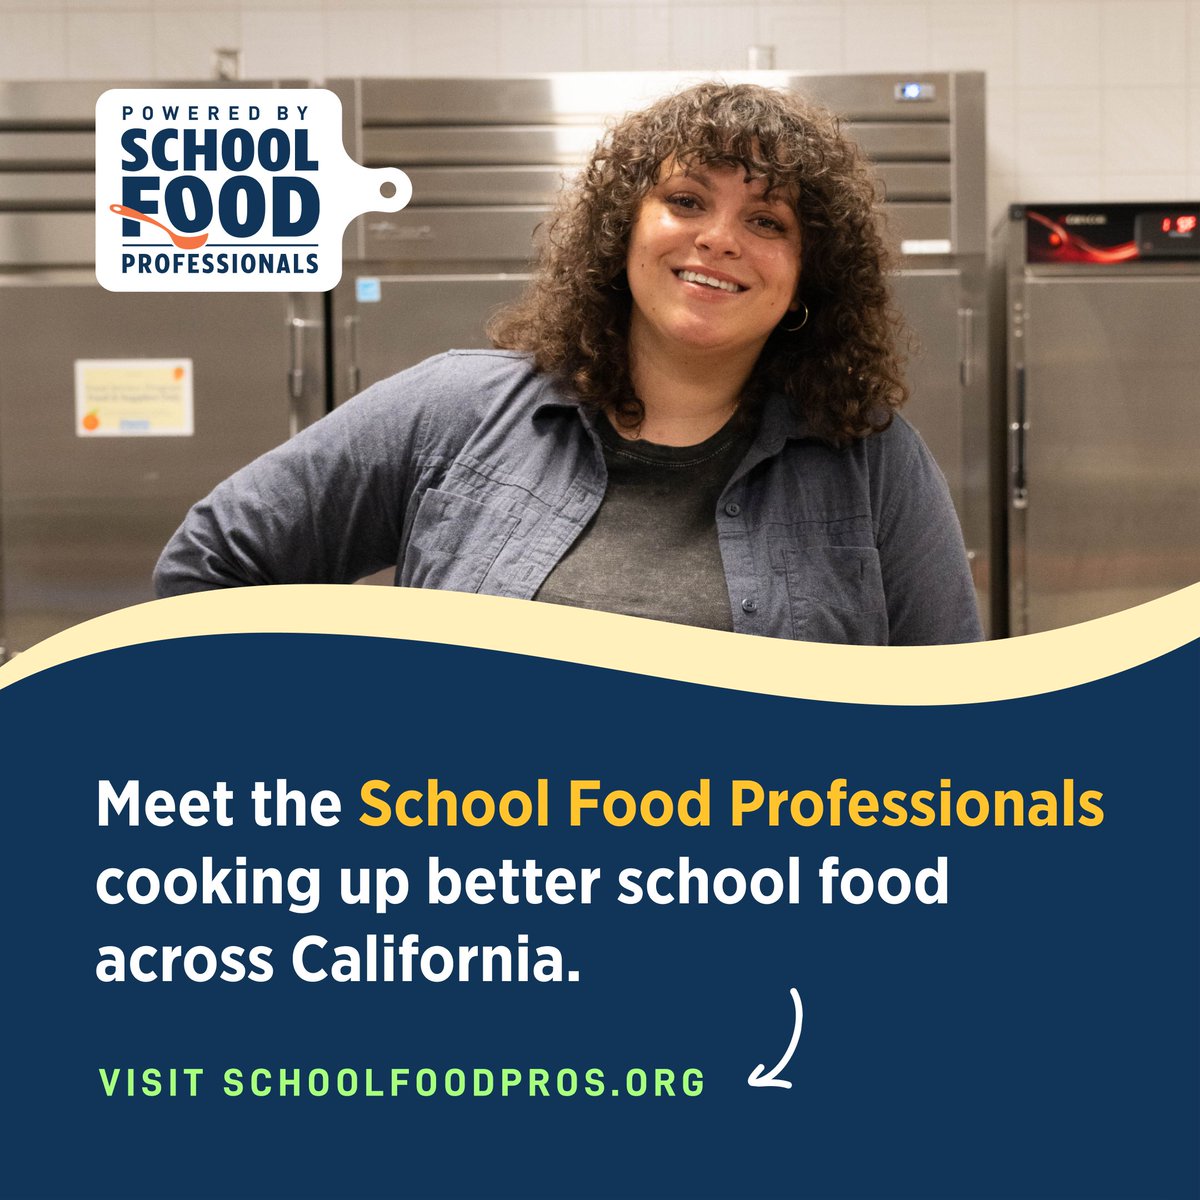 To change school food, we need to change the way people think about school food jobs. That’s why we partnered with the State of California and the California Community Colleges Chancellor’s Office to launch a groundbreaking campaign. Learn more at SchoolFoodPros.org.